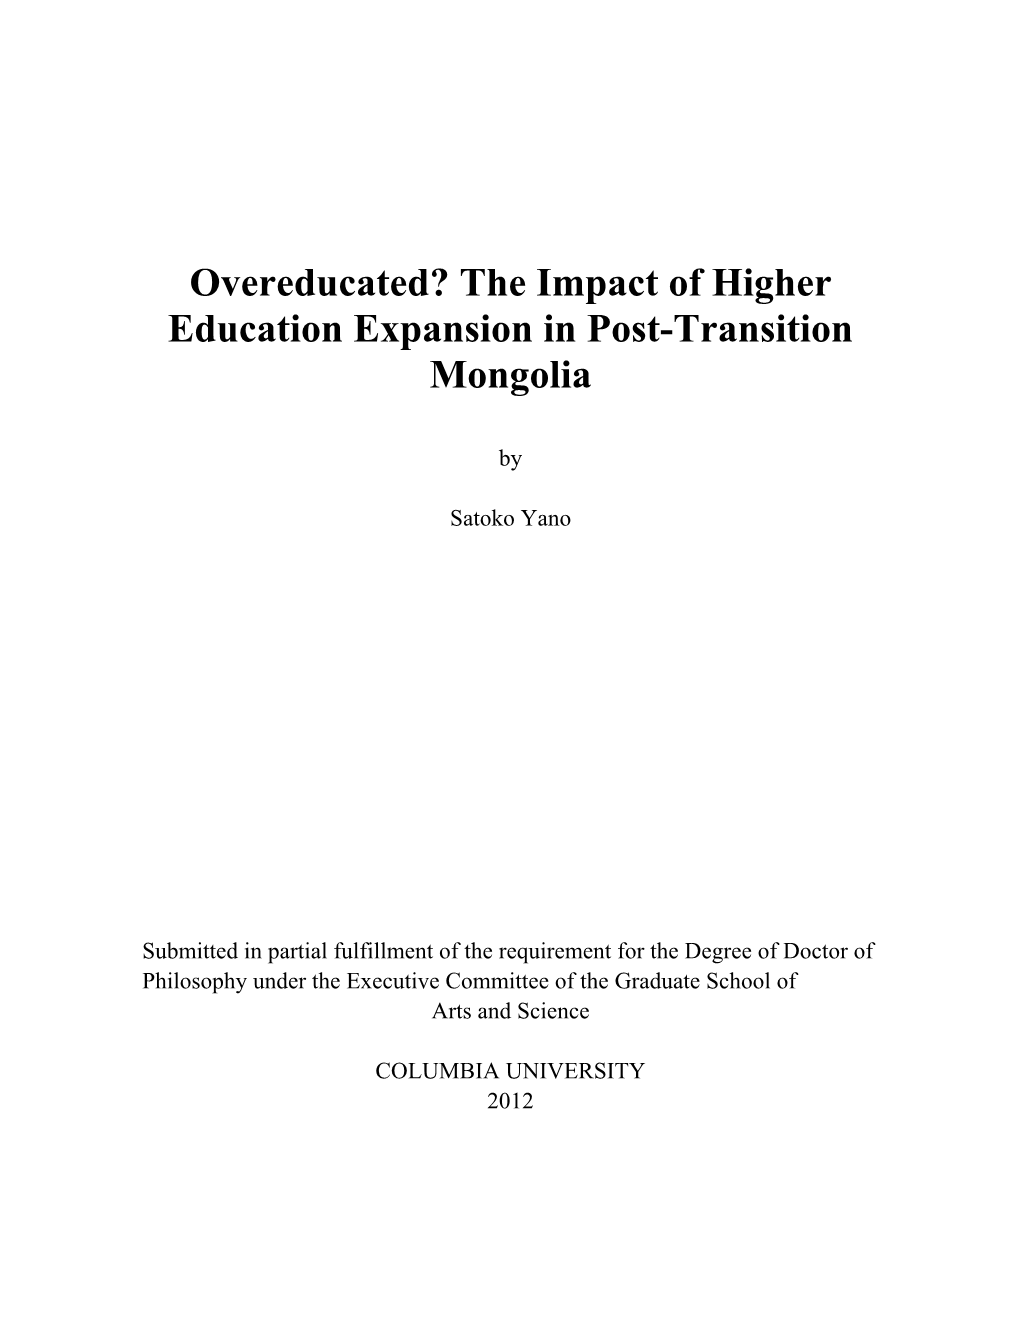 Overeducated? the Impact of Higher Education Expansion in Post-Transition Mongolia